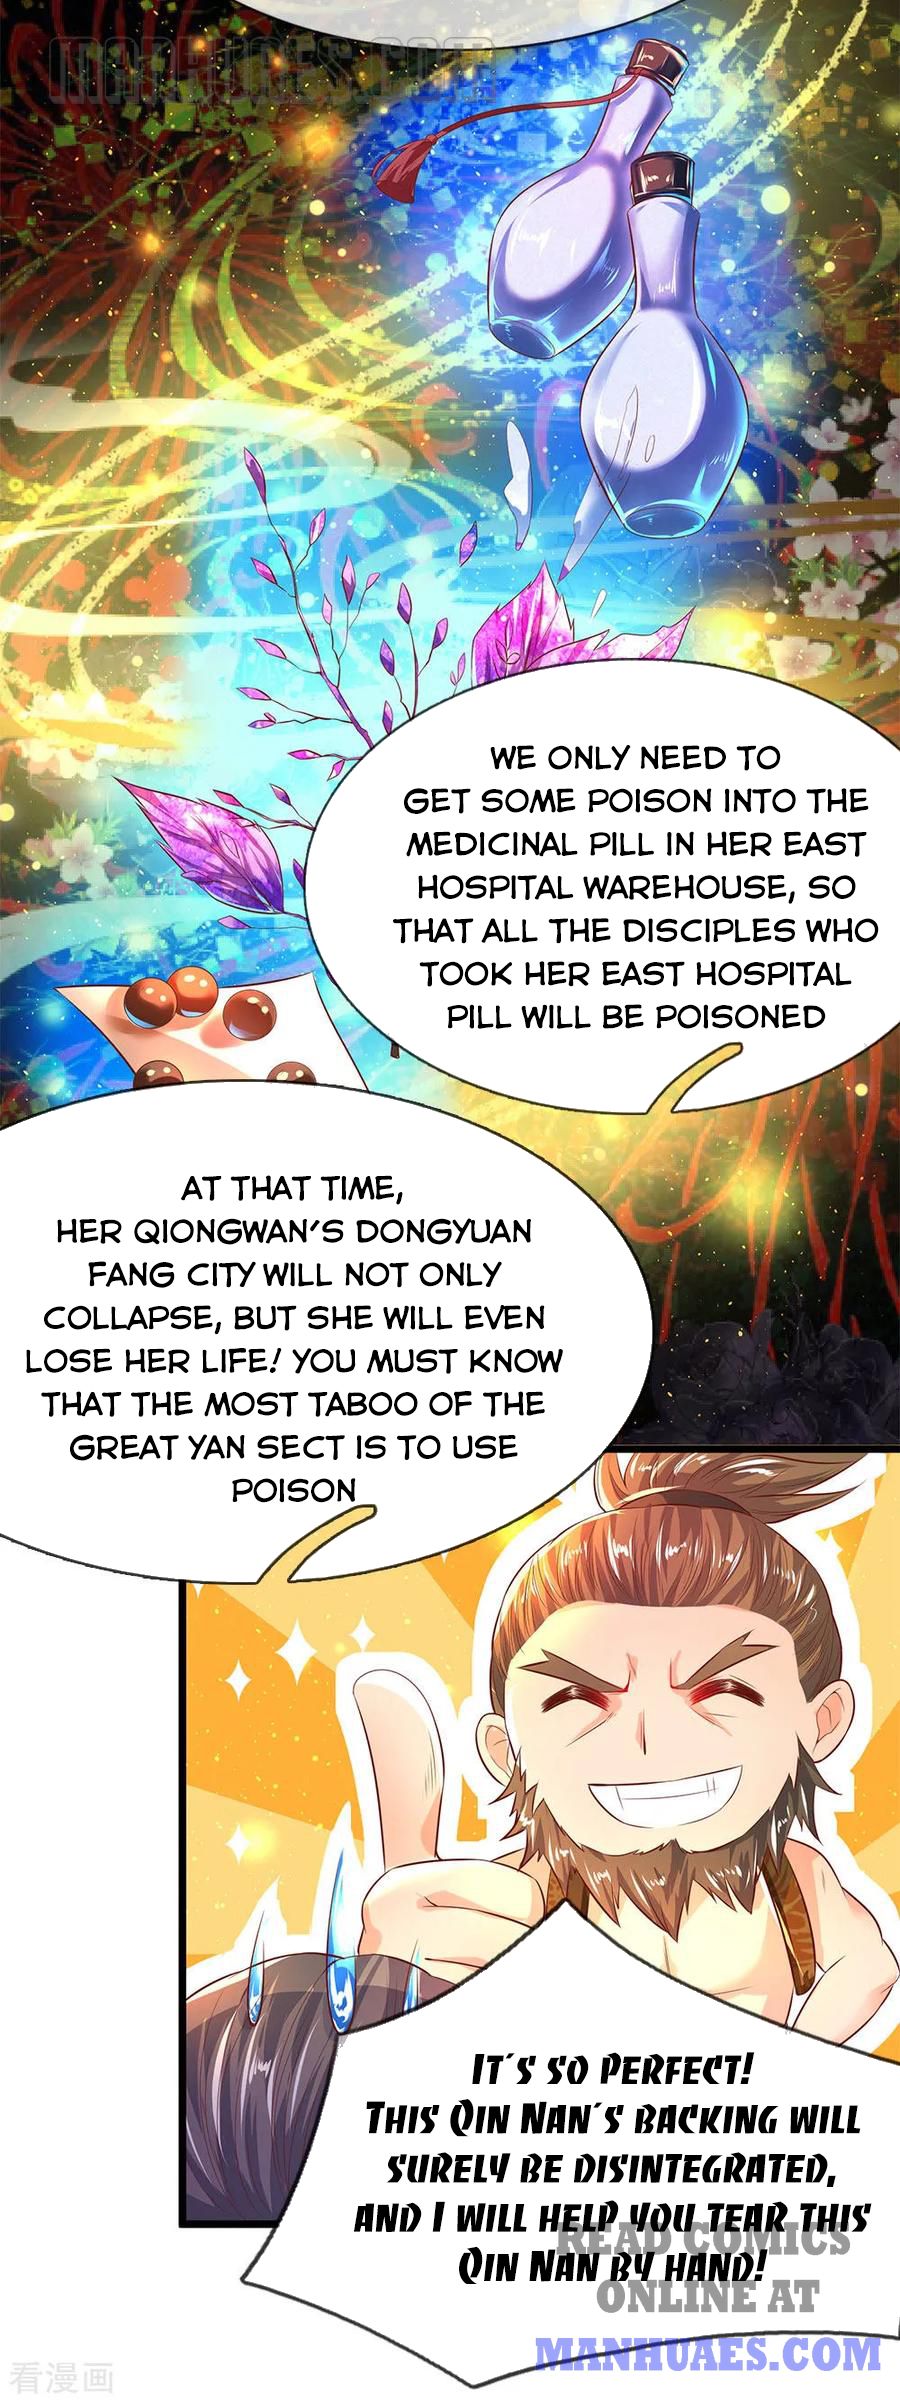 Marvelous Hero Of The Sword - Page 2